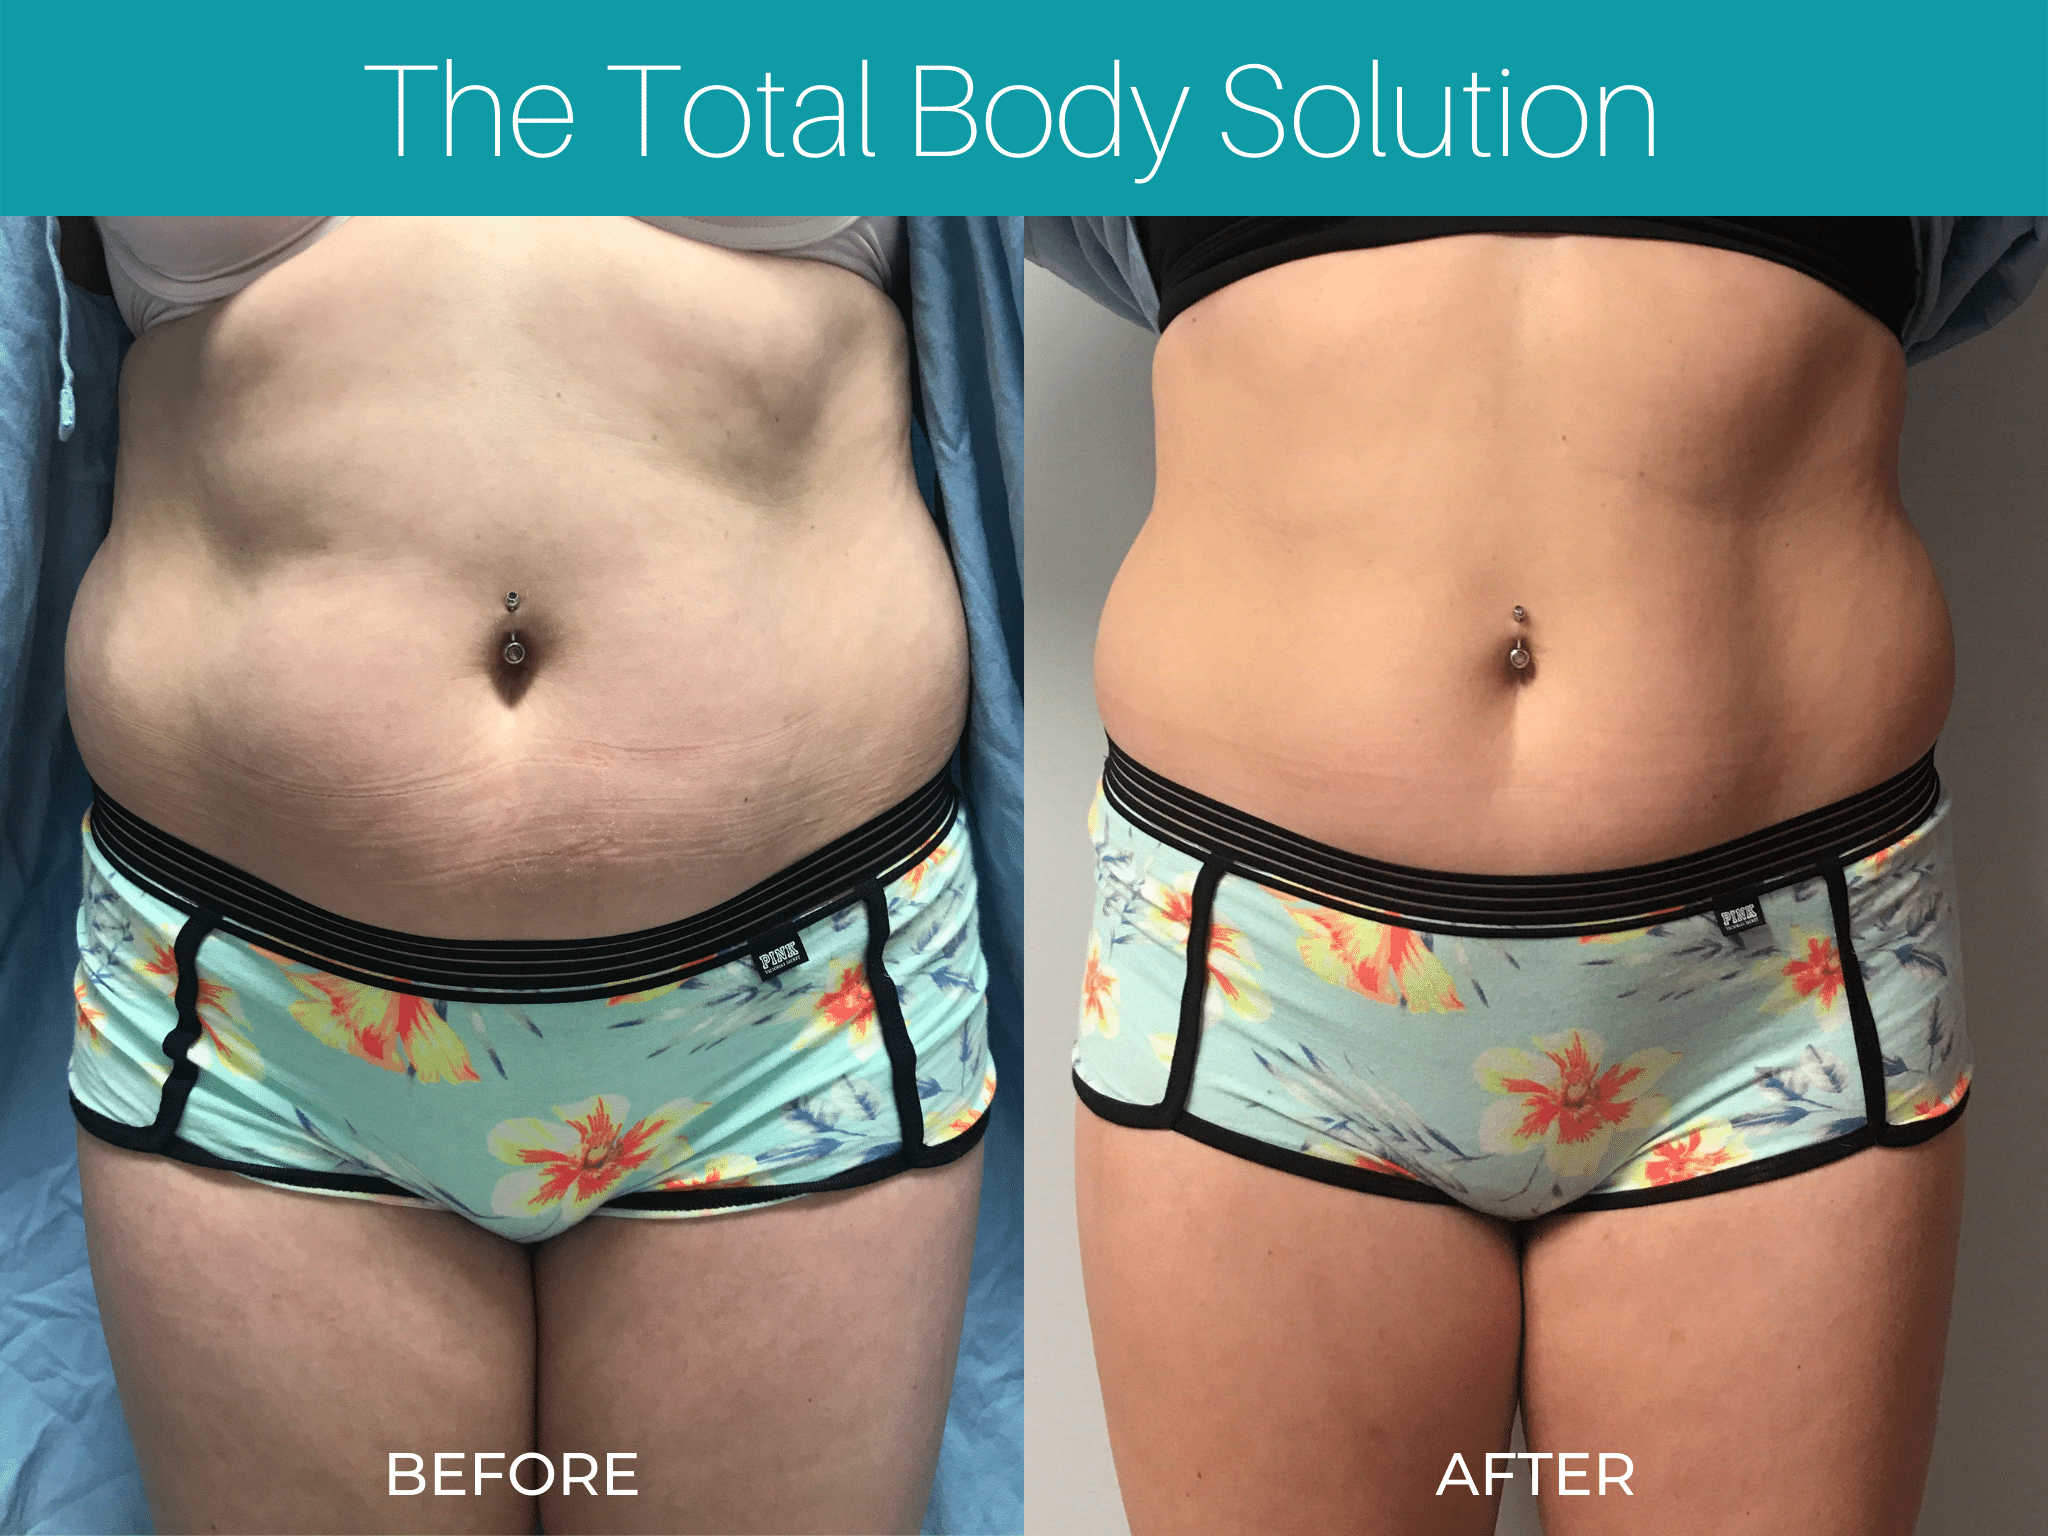 The Total Body Solution